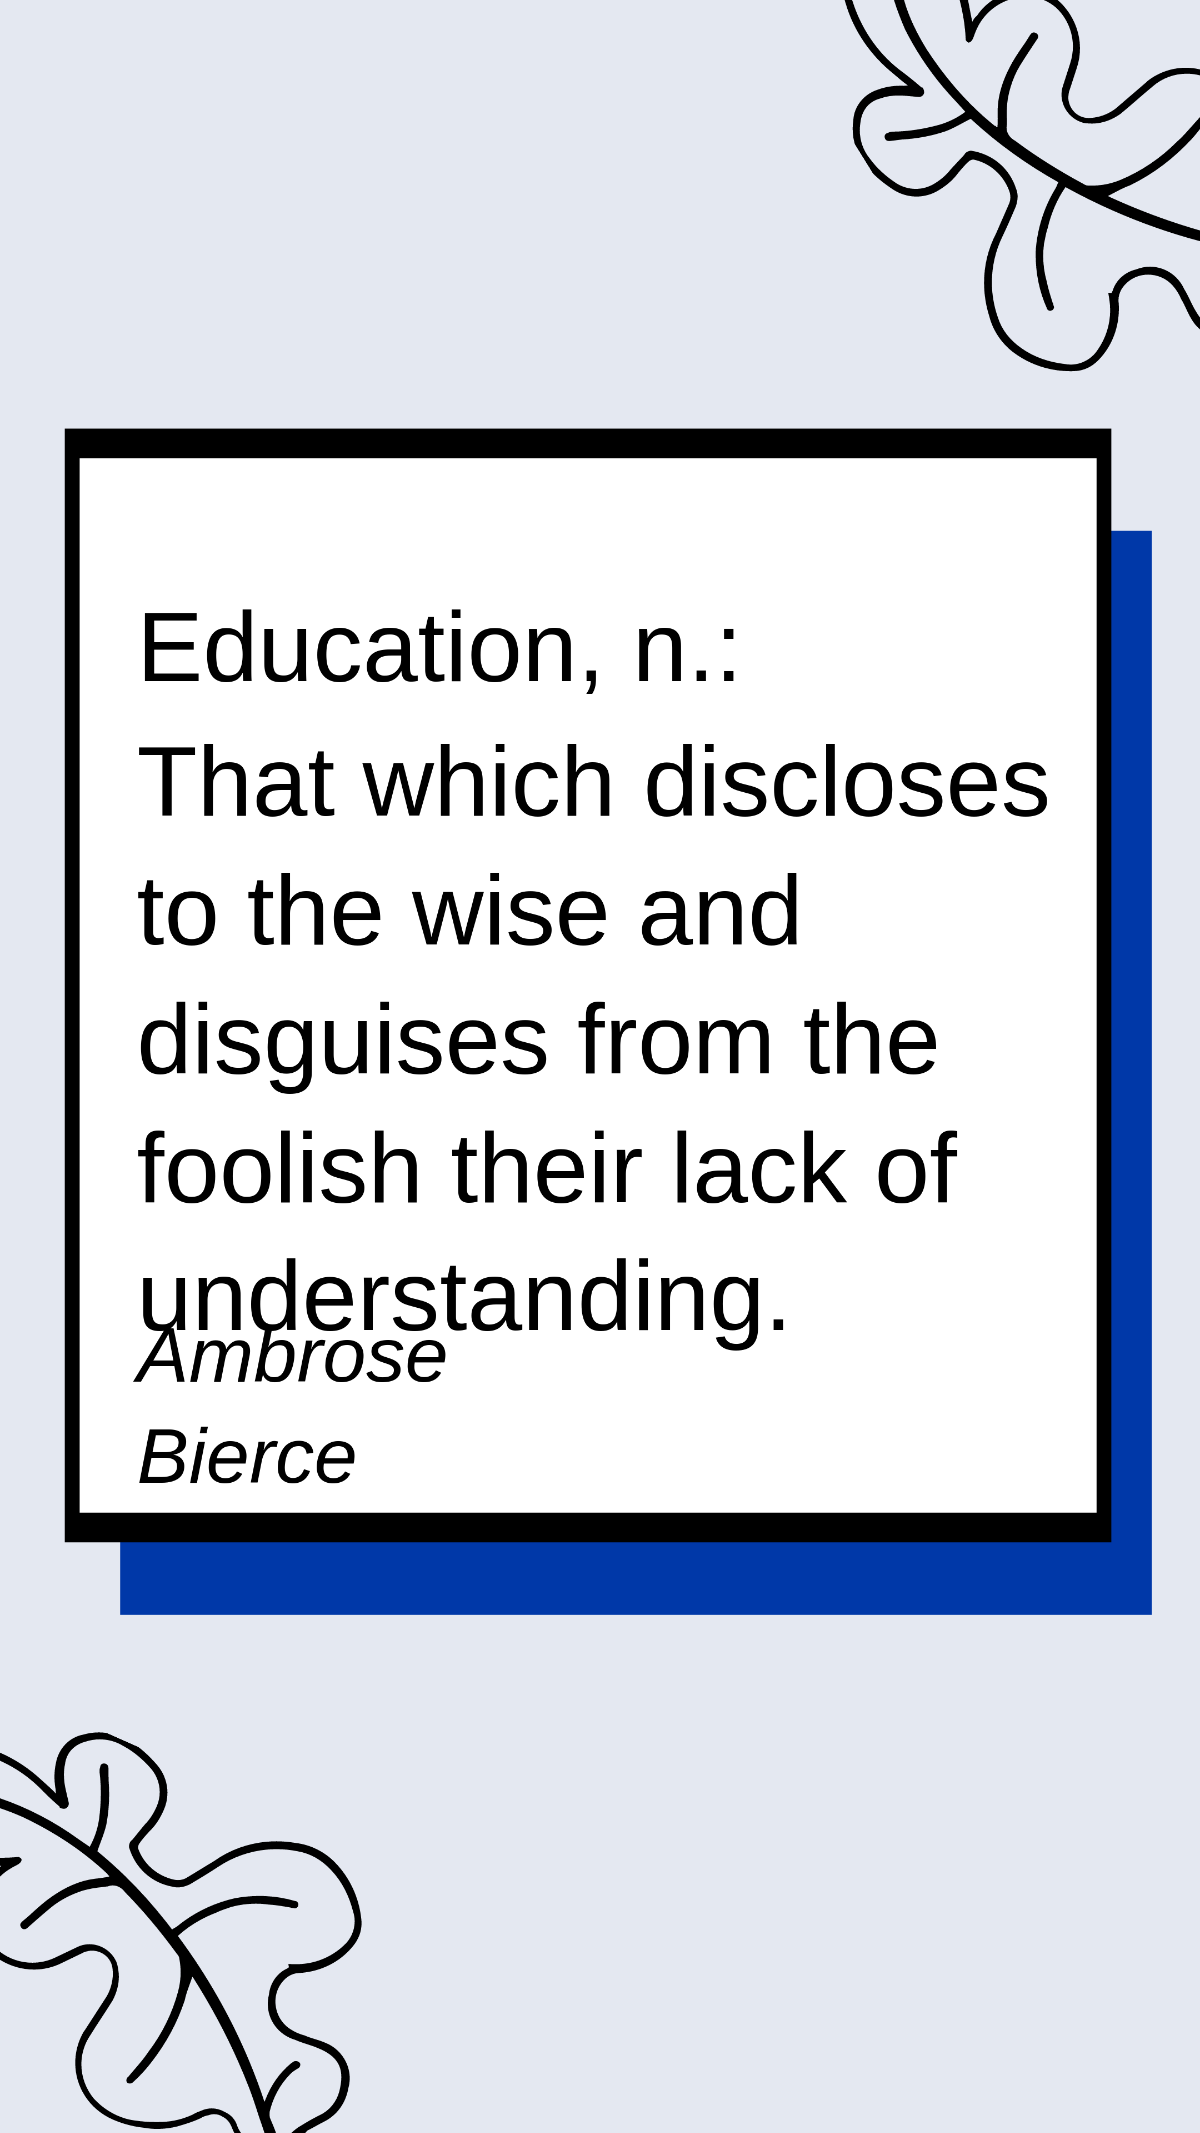 Free Ambrose Bierce - Education, n.: That which discloses to the wise and disguises from the foolish their lack of understanding. Template